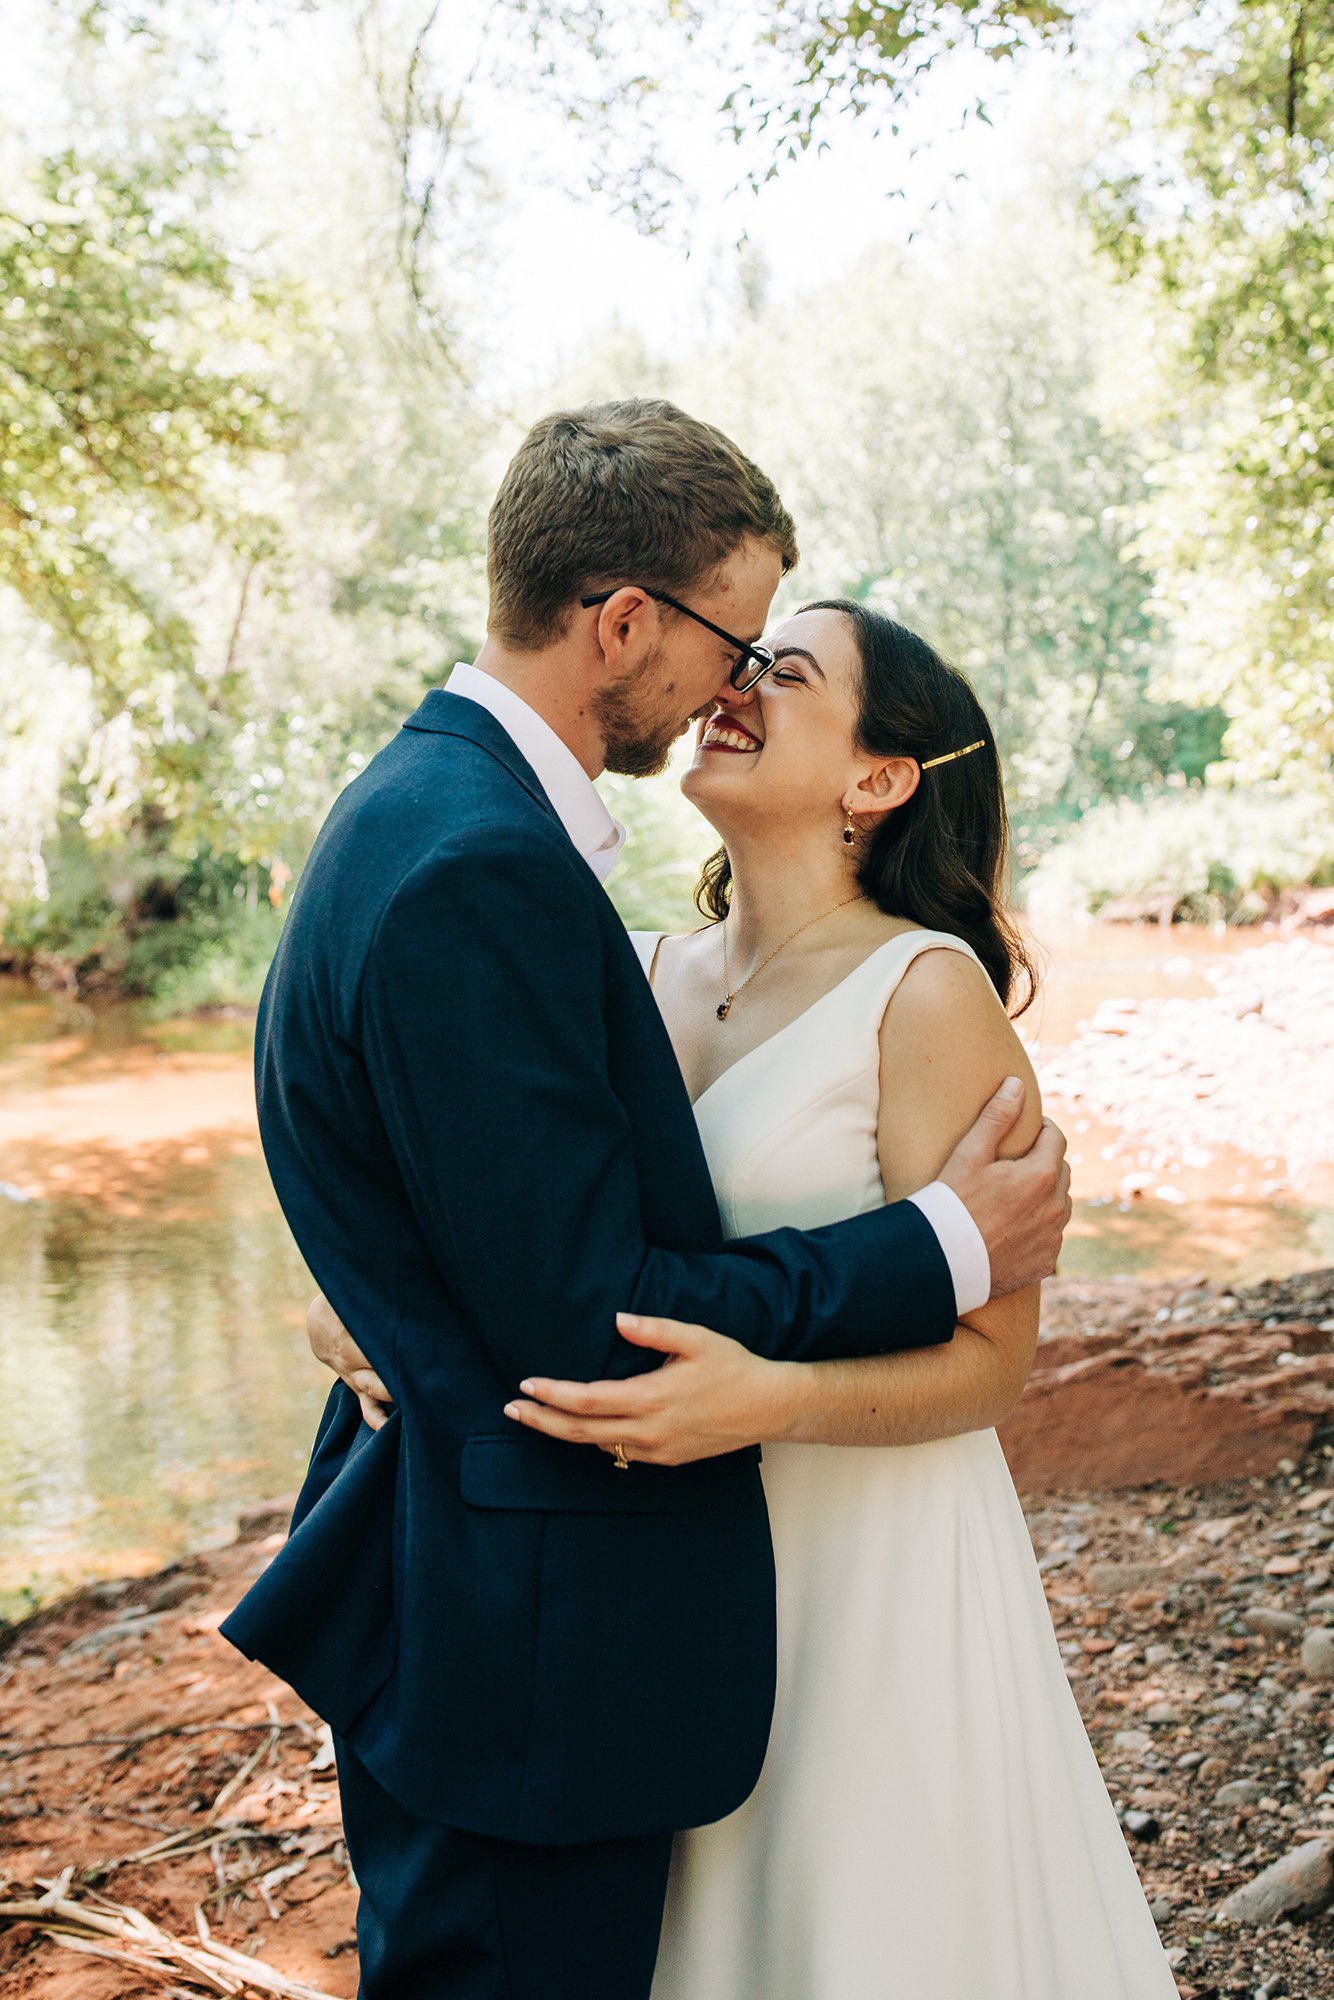 A loving embrace for two newly weds during their sunny Sedona elopement